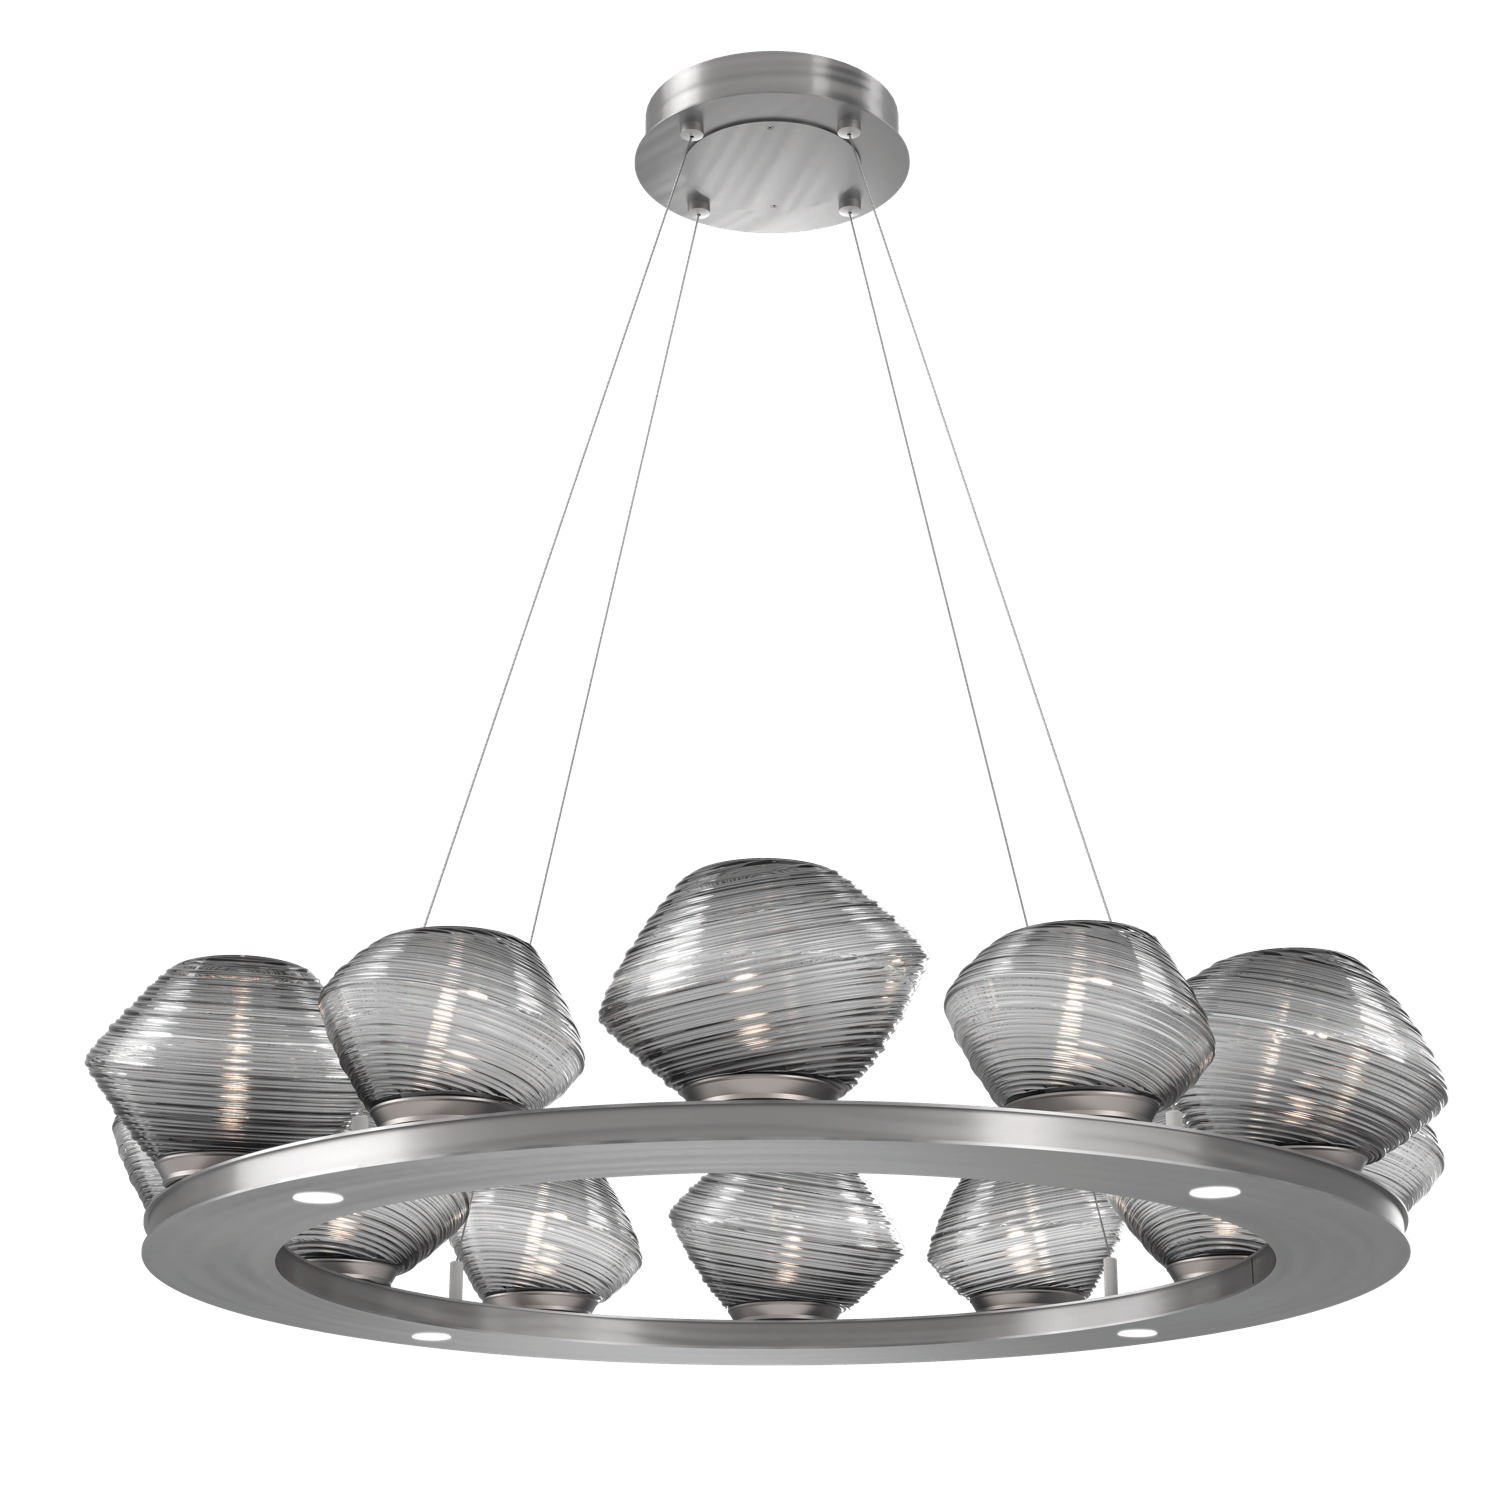 CHB0089-0C-SN-S-Hammerton-Studio-Mesa-36-inch-ring-chandelier-with-satin-nickel-finish-and-smoke-blown-glass-shades-and-LED-lamping